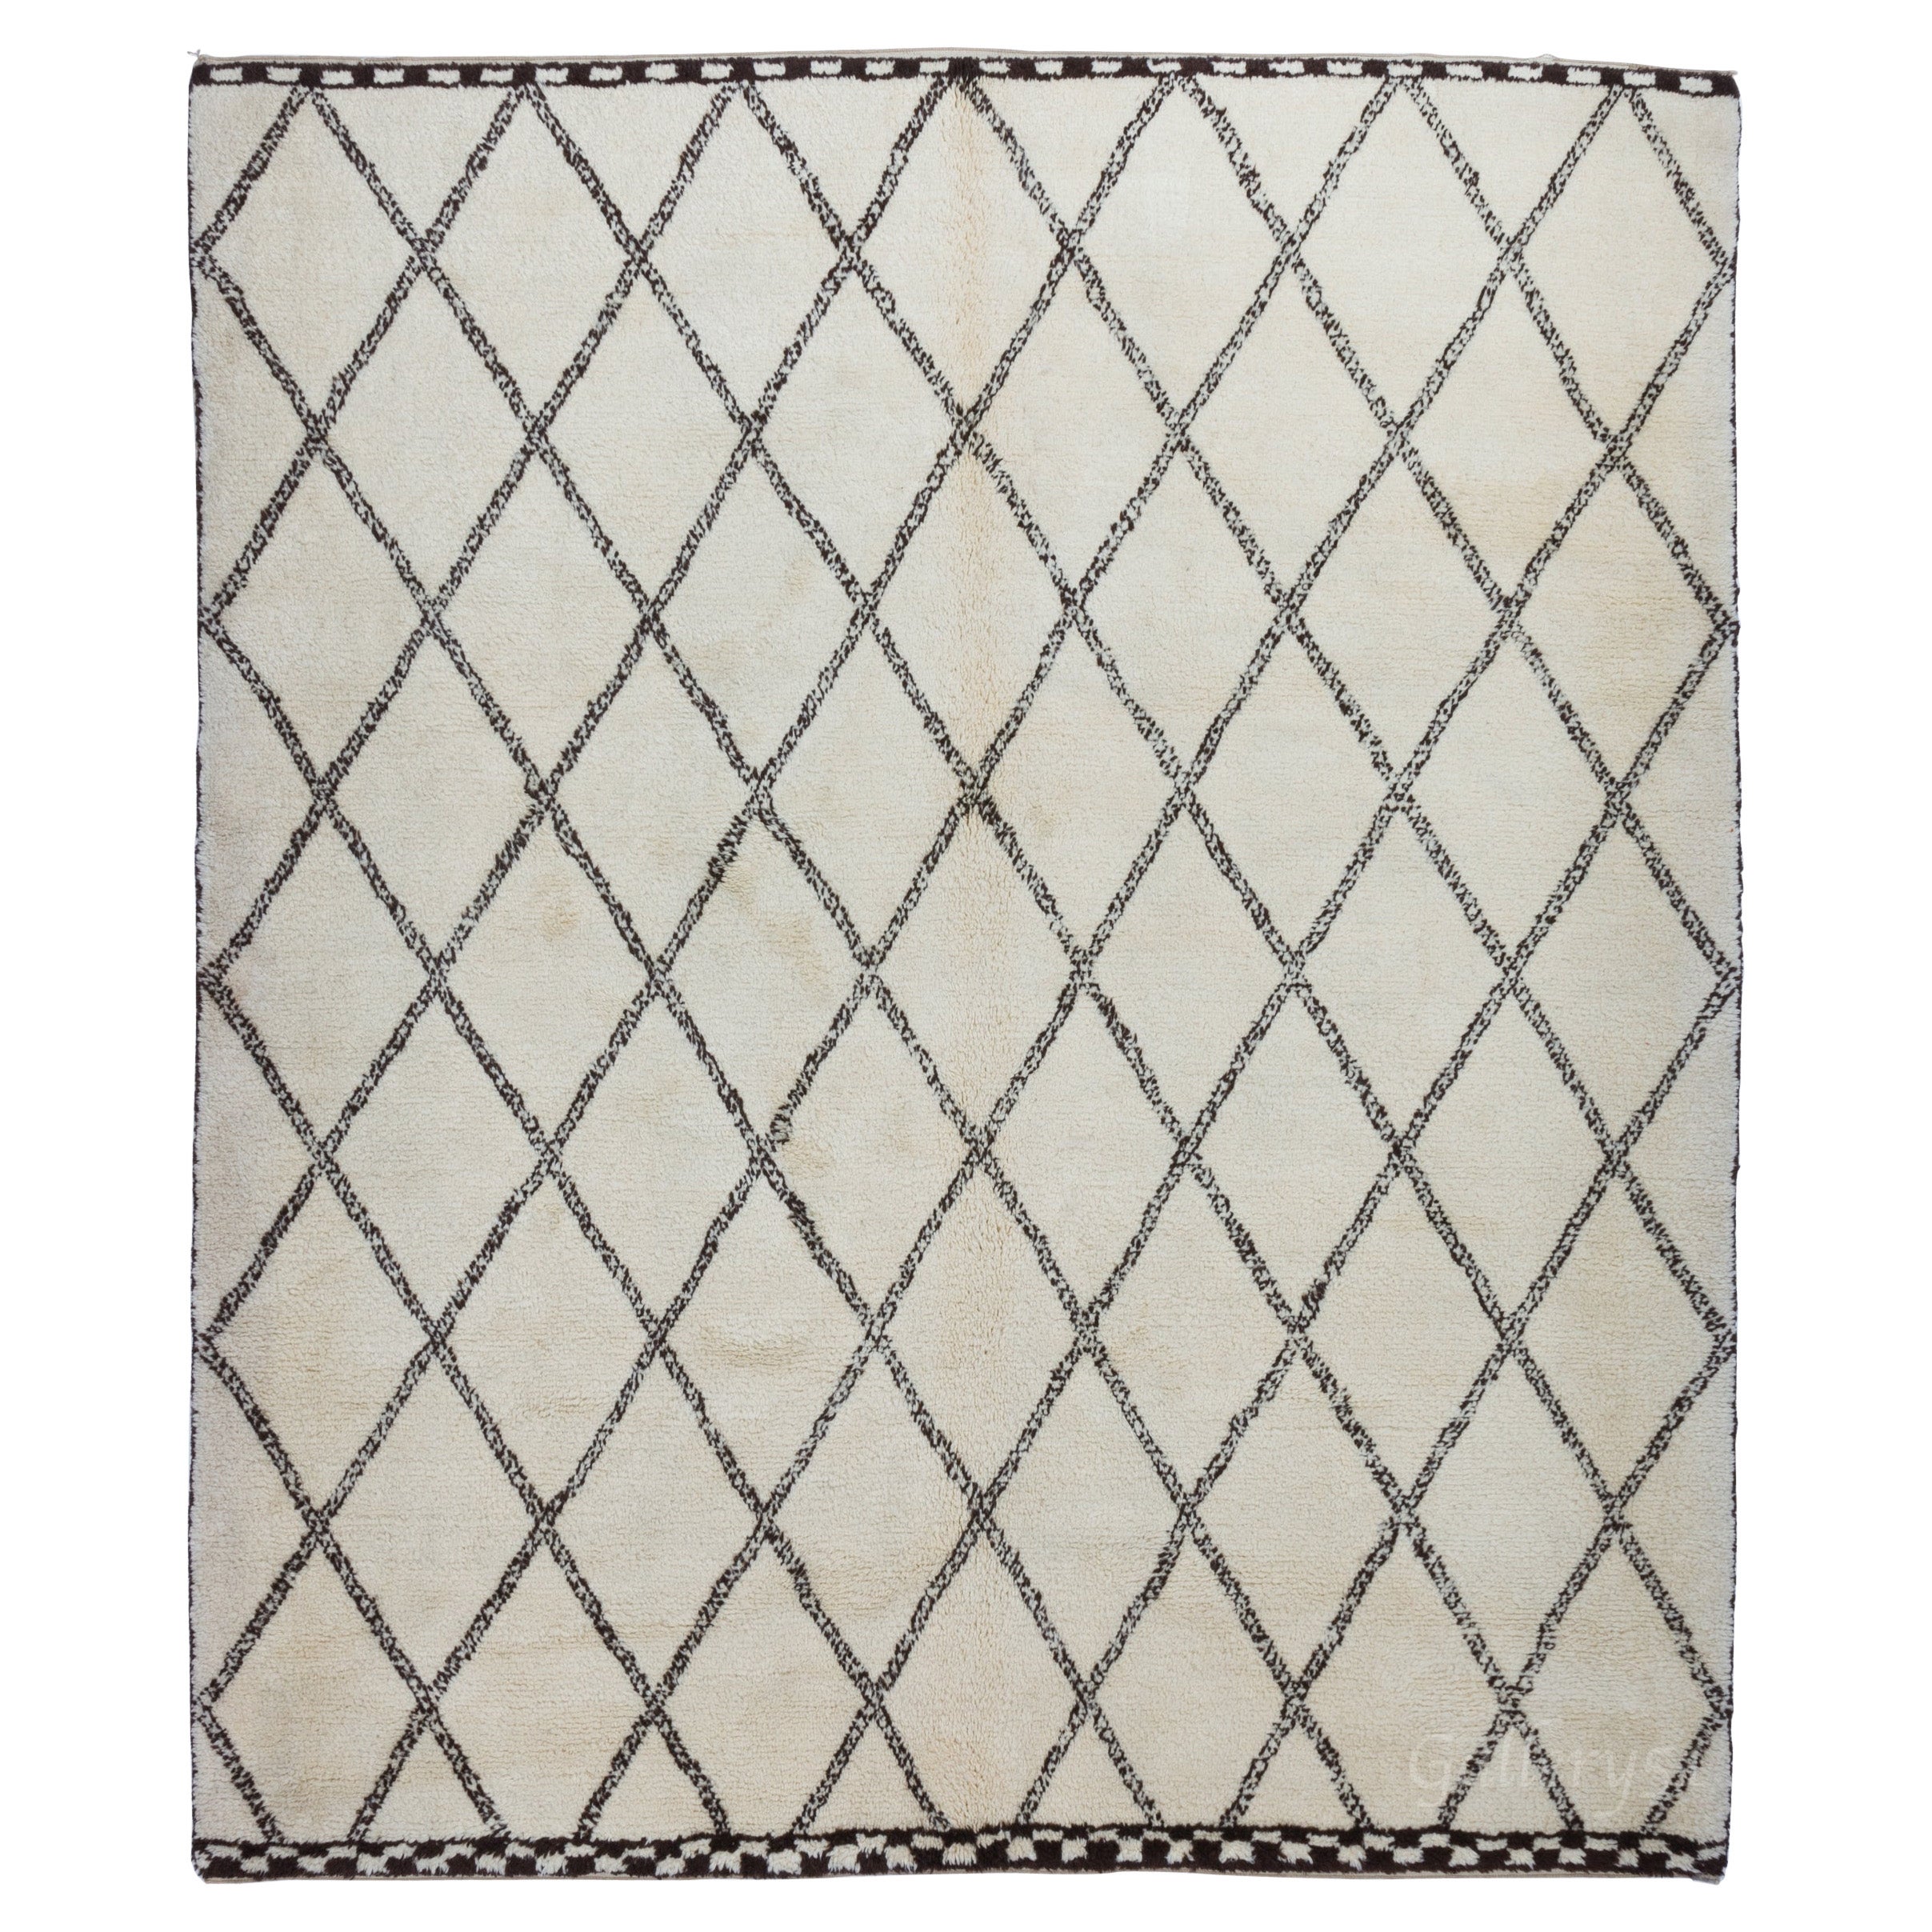 8x10 ft Modern Moroccan Beni Ourain Rug, 100% Un-Dyed Wool, Custom Options Avai. For Sale